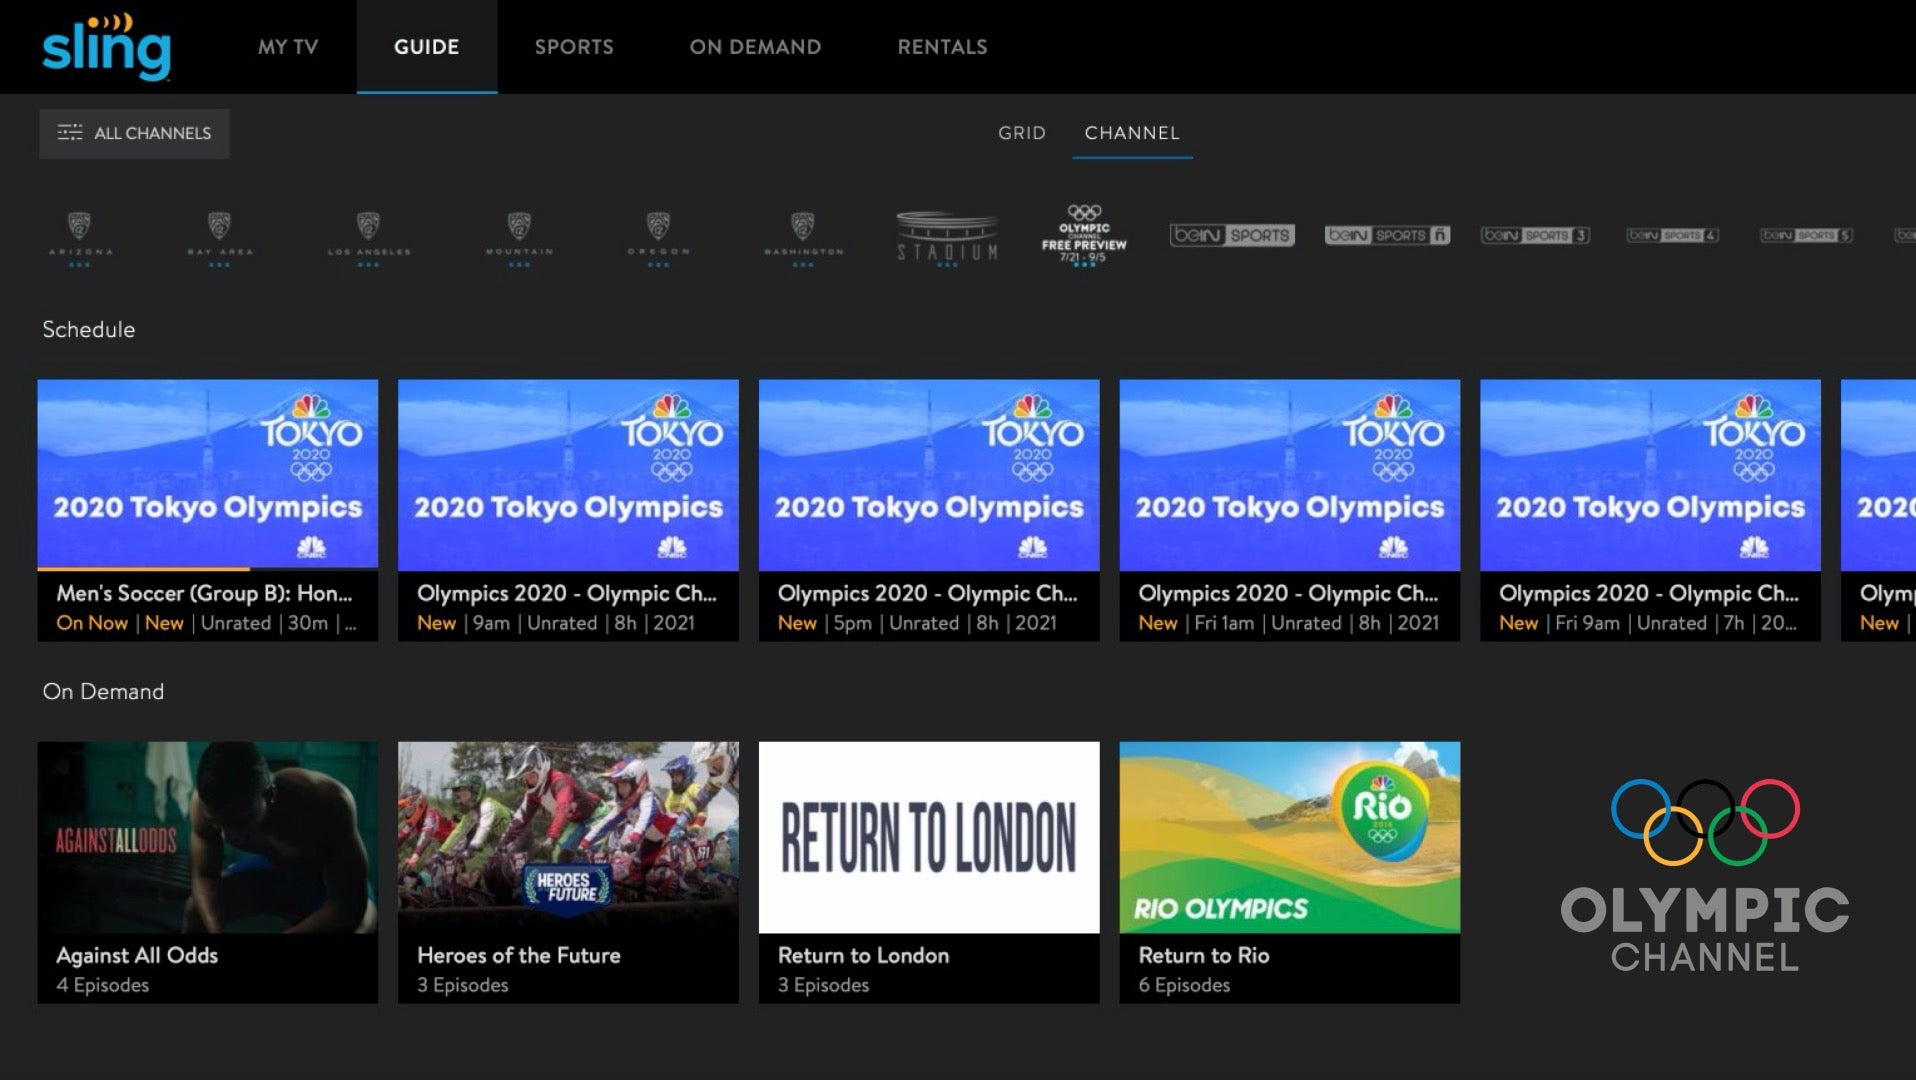 Olympic channel